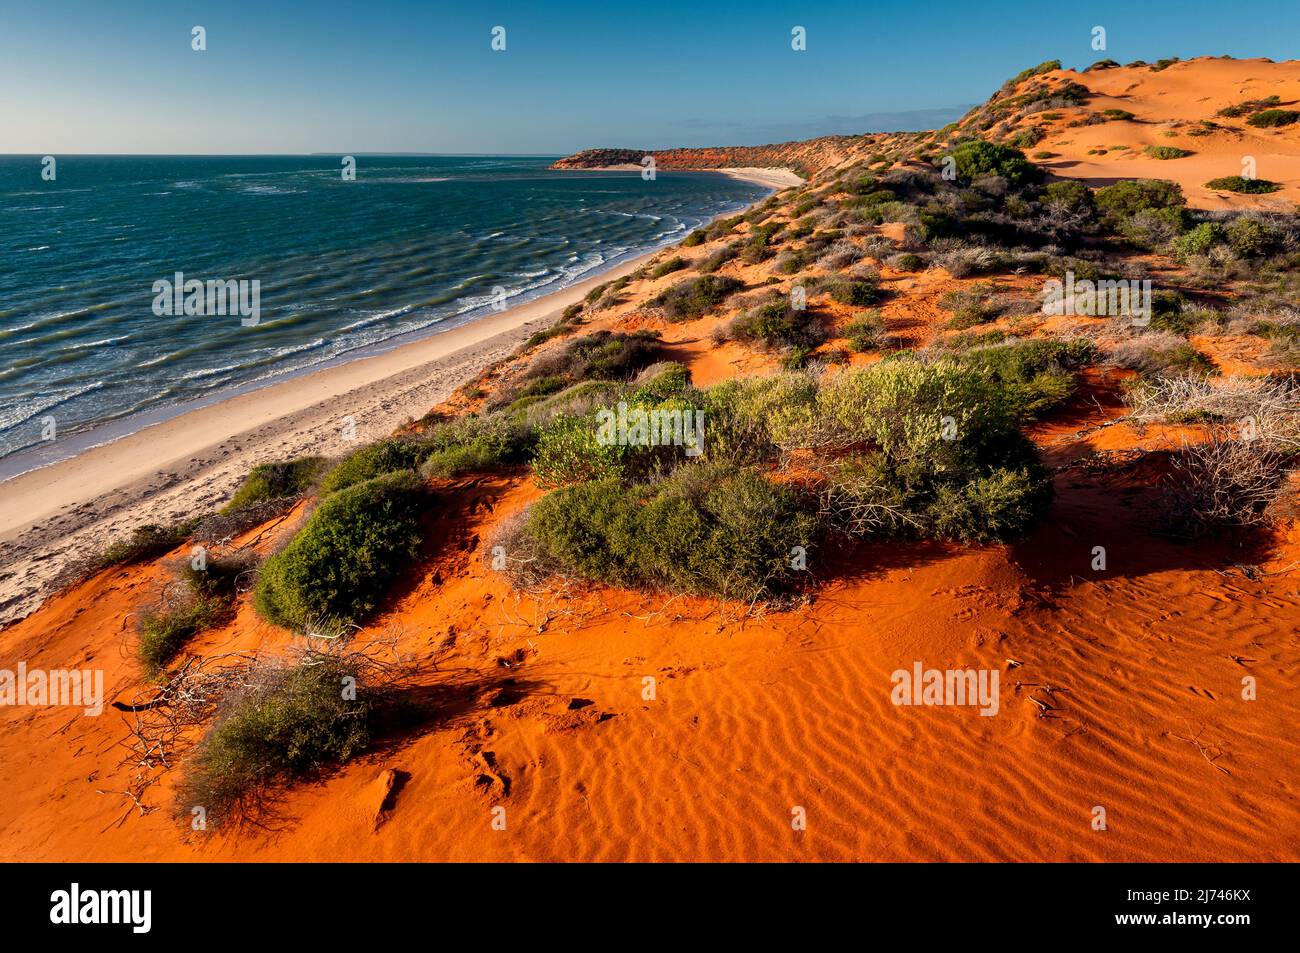 Unique desert scenery at Herald Bight, part of world heritage-listed Shark Bay. Stock Photo